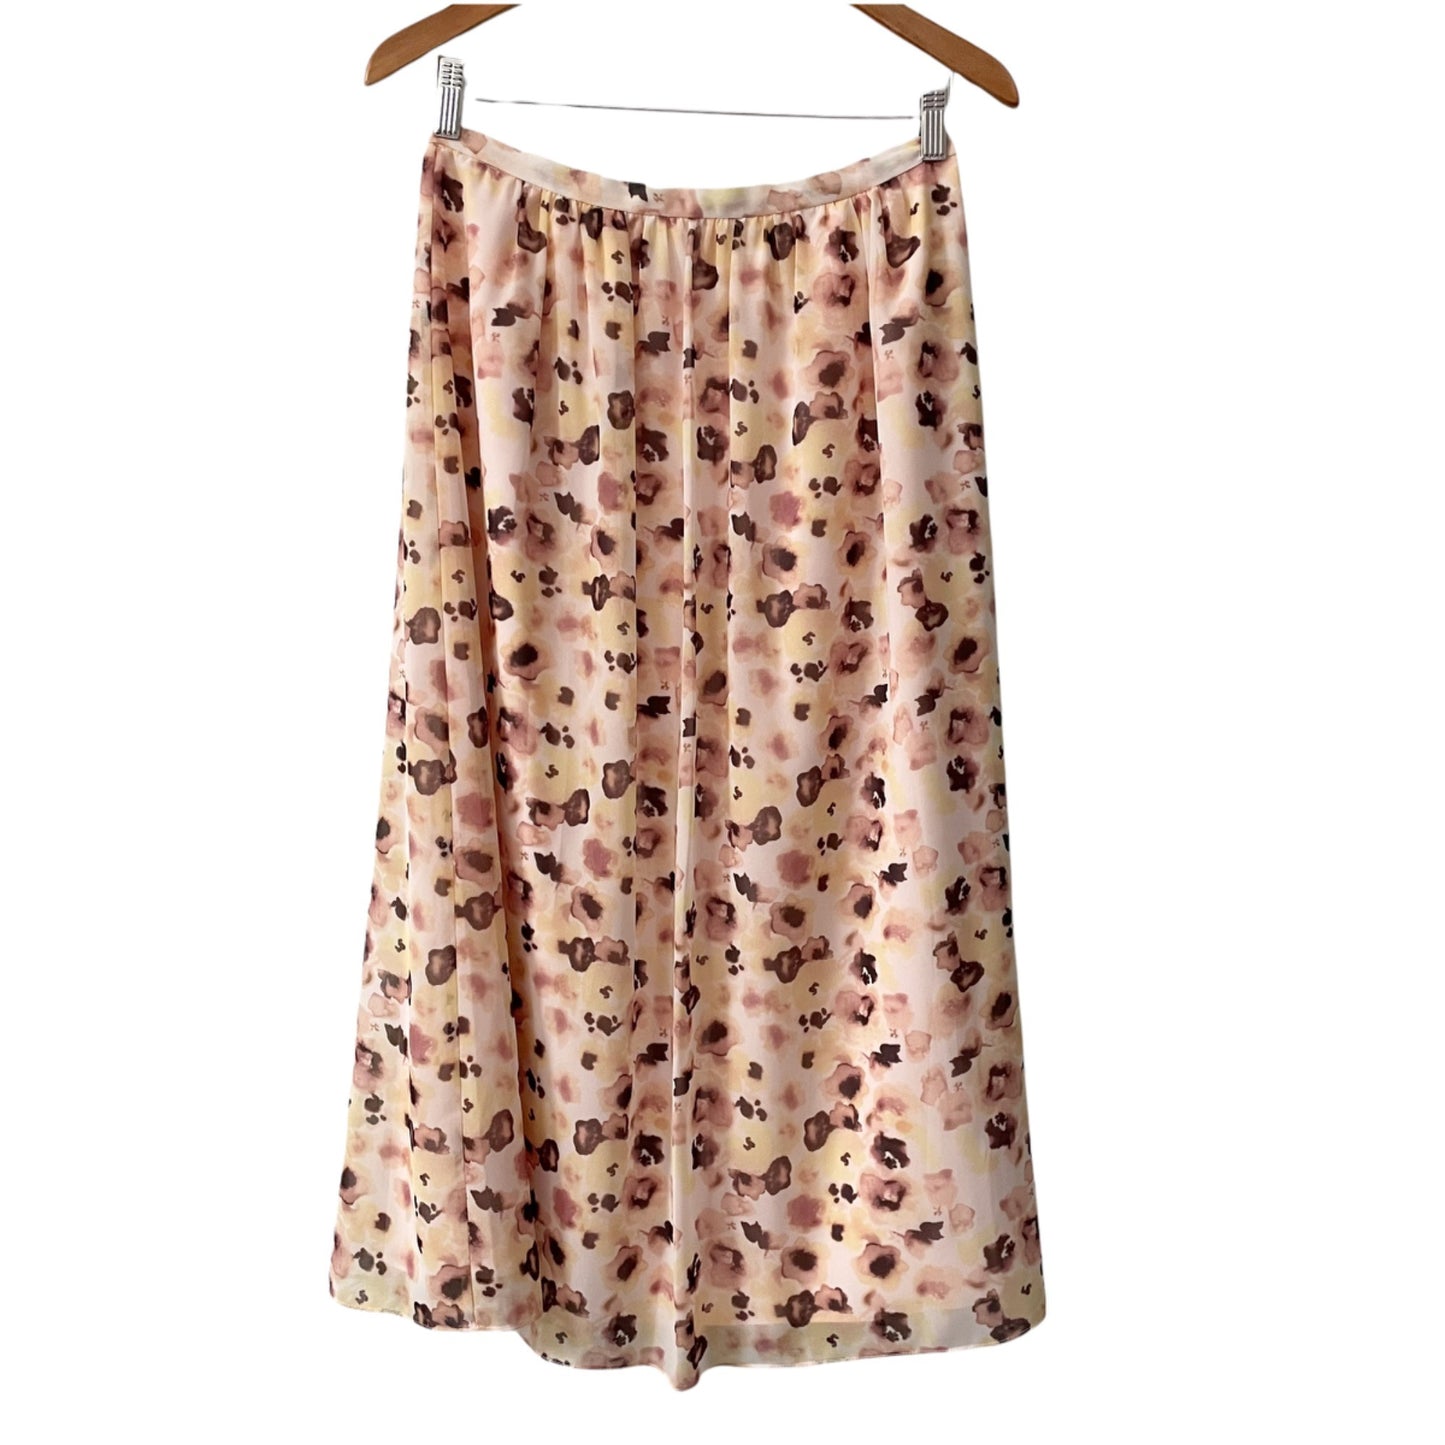 NWT Gianni Bini Vic Wildflower Floral Ivory/Rose Midi Skirt Women's Size Small